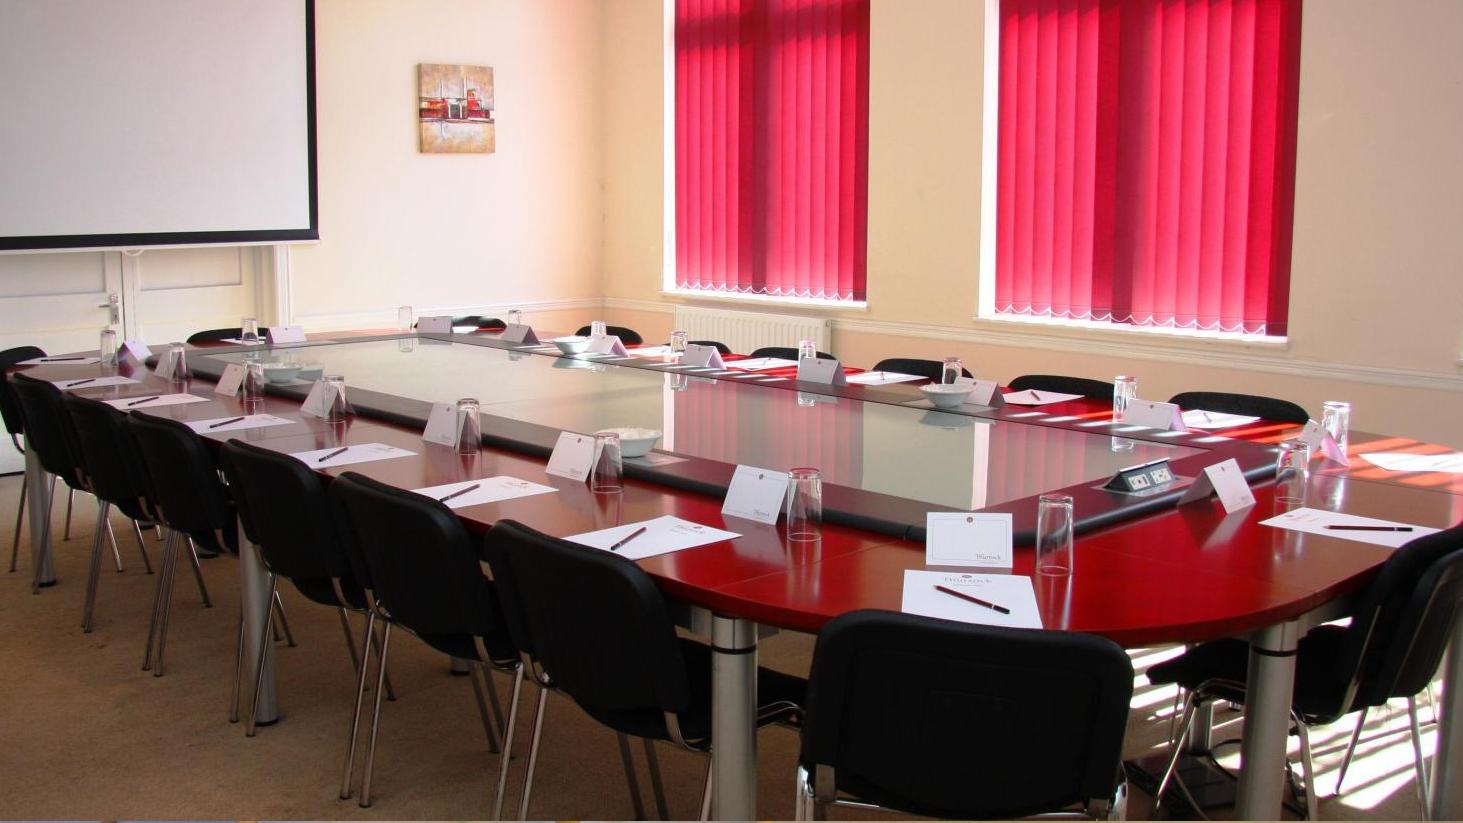 Find your Meeting Room in Dartford